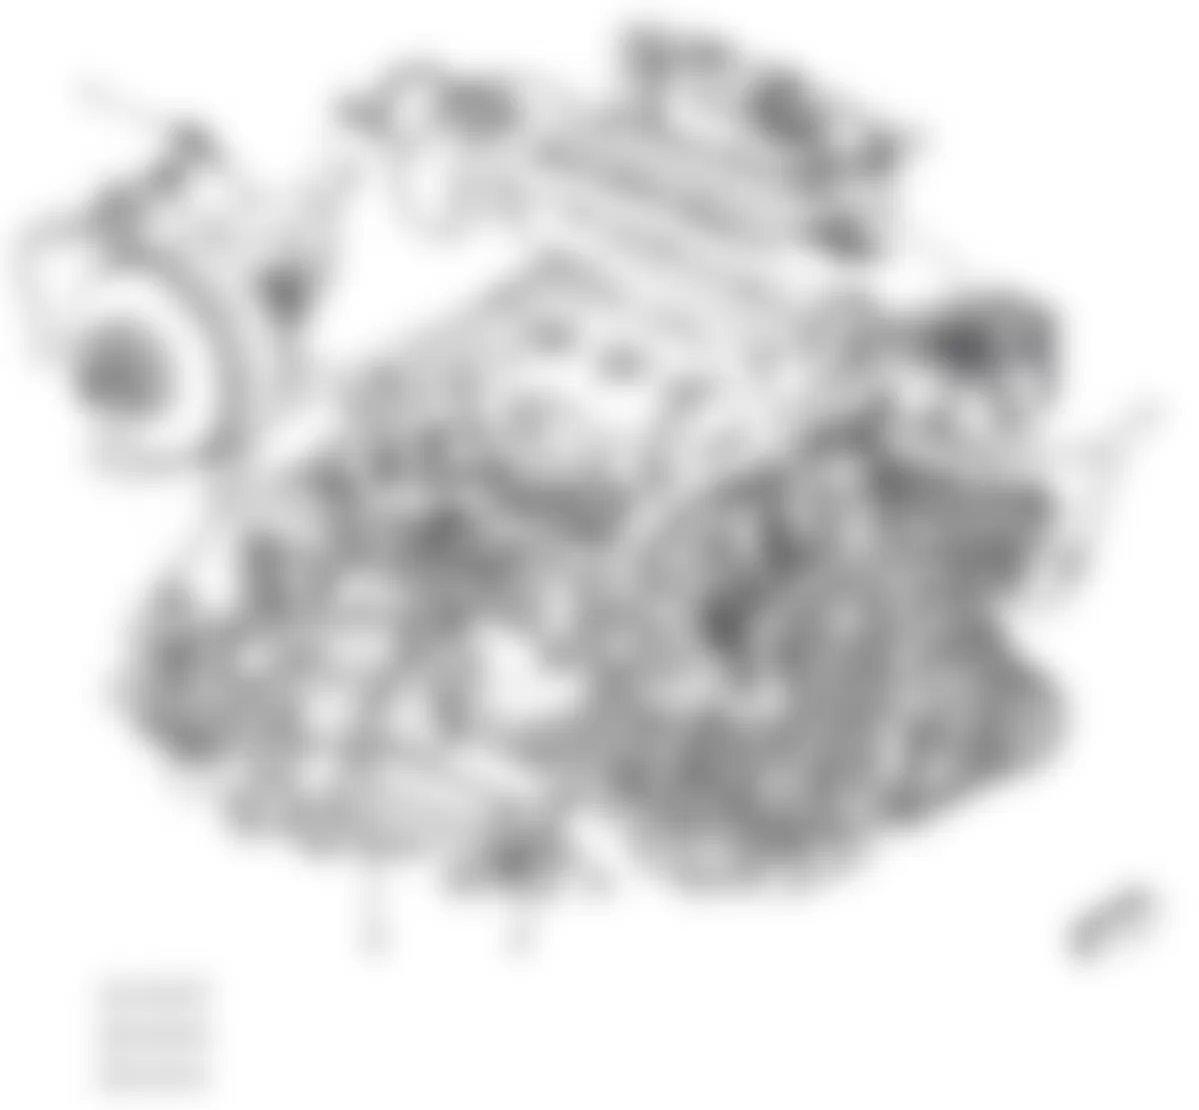 GMC Acadia SLT 2009 - Component Locations -  Right Side Of Engine